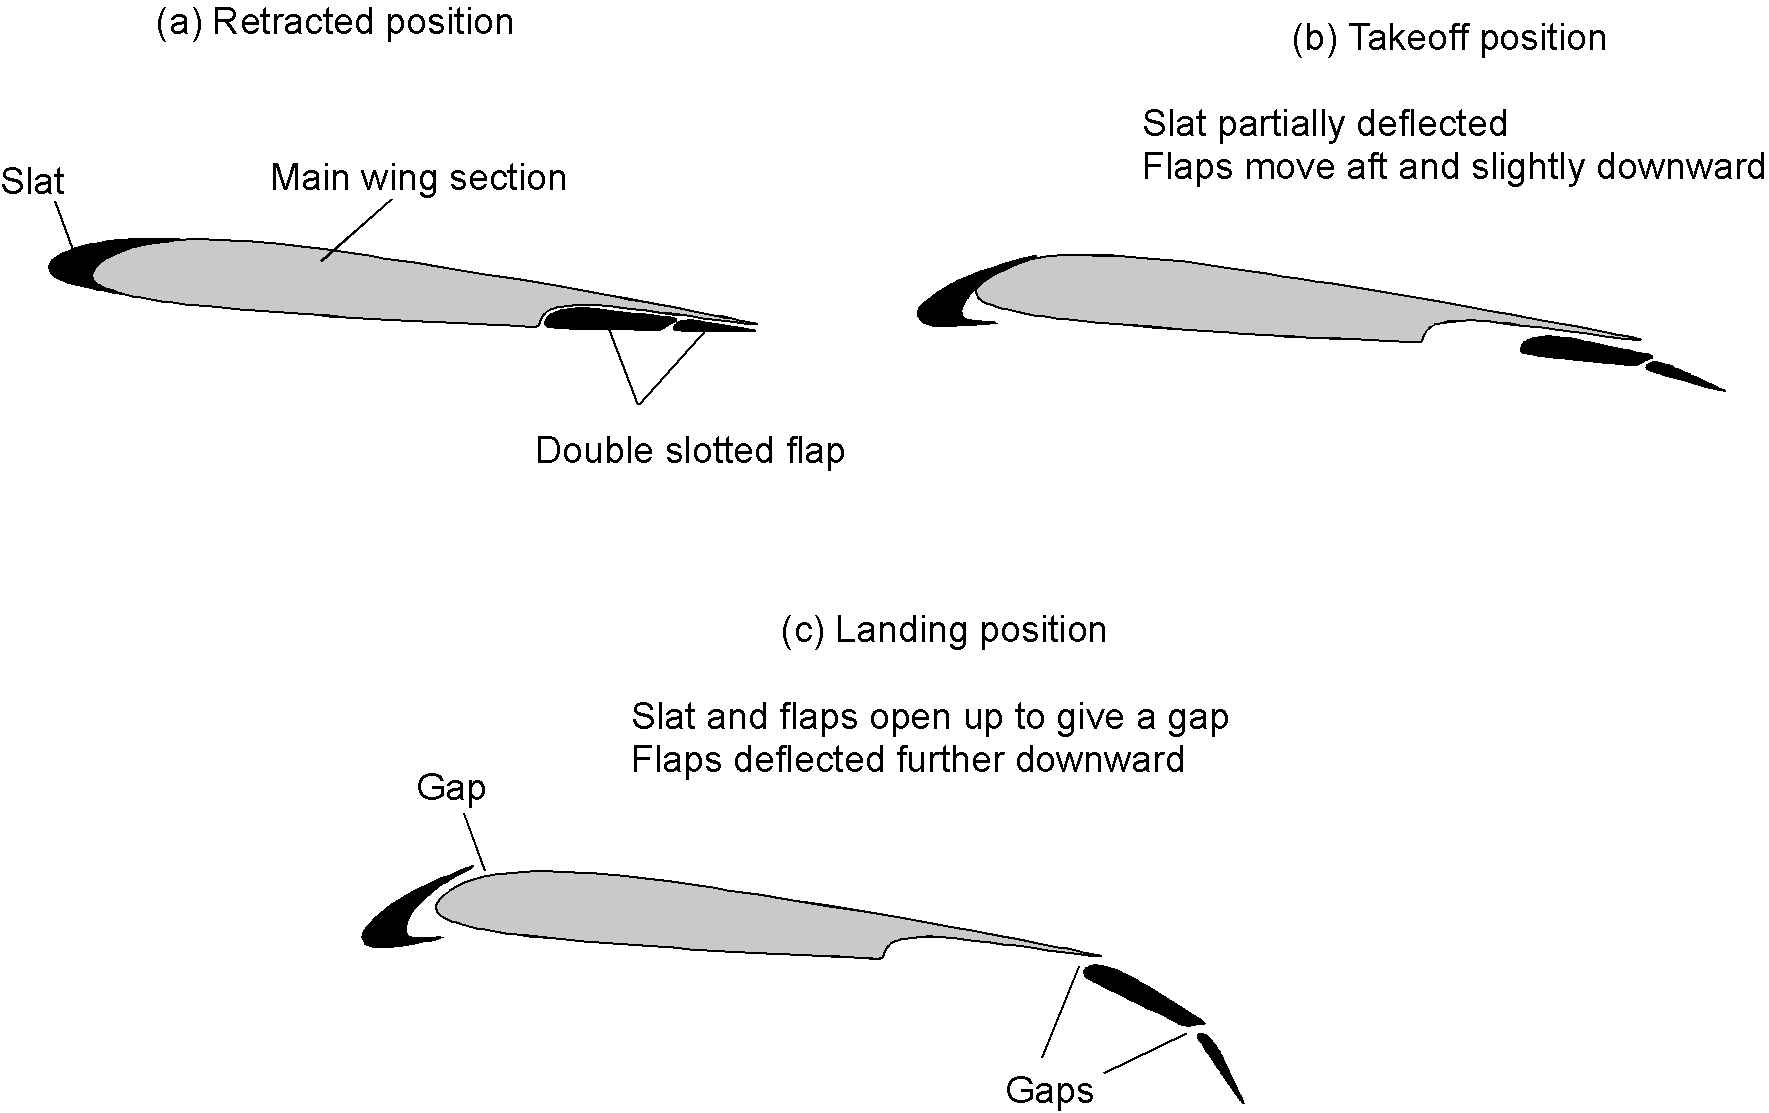 Diagram of three different wing cross sections, showing the progression of slat and double slotted flaps from retracted through takeoff, and in landing.